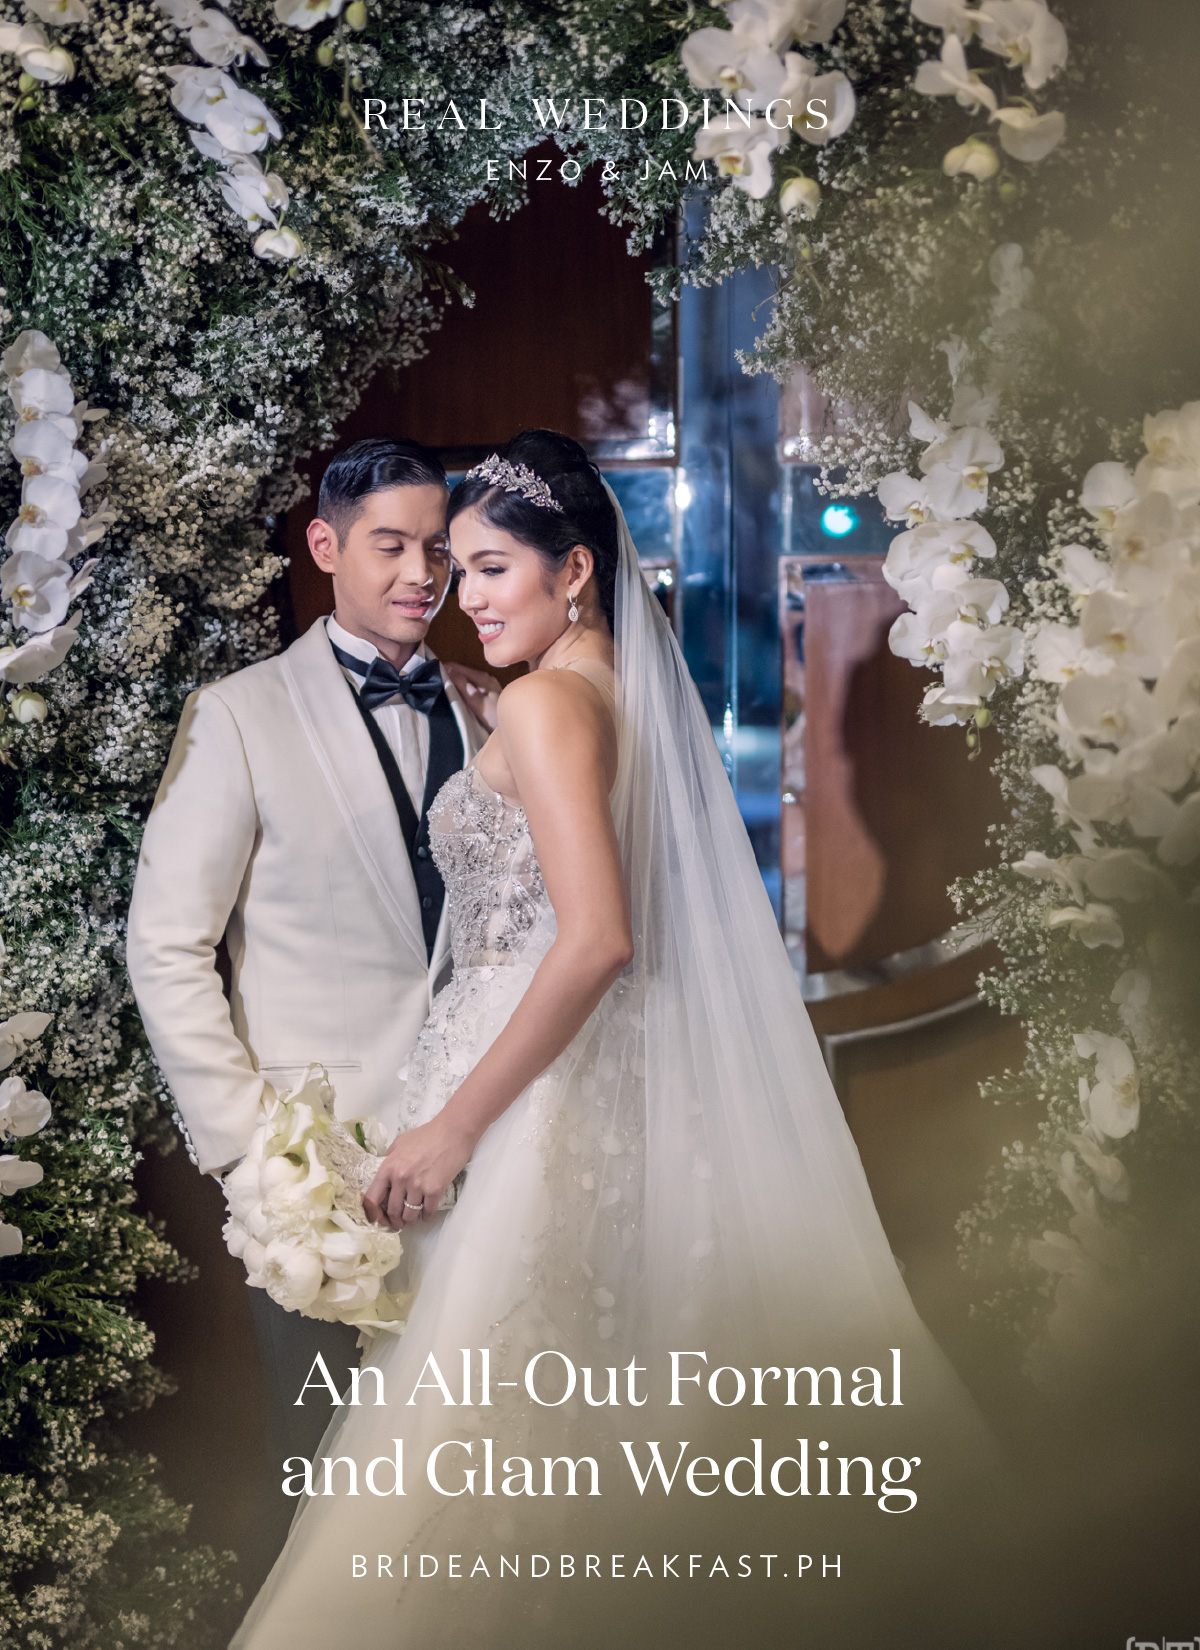 An All-Out Formal and Glam Wedding